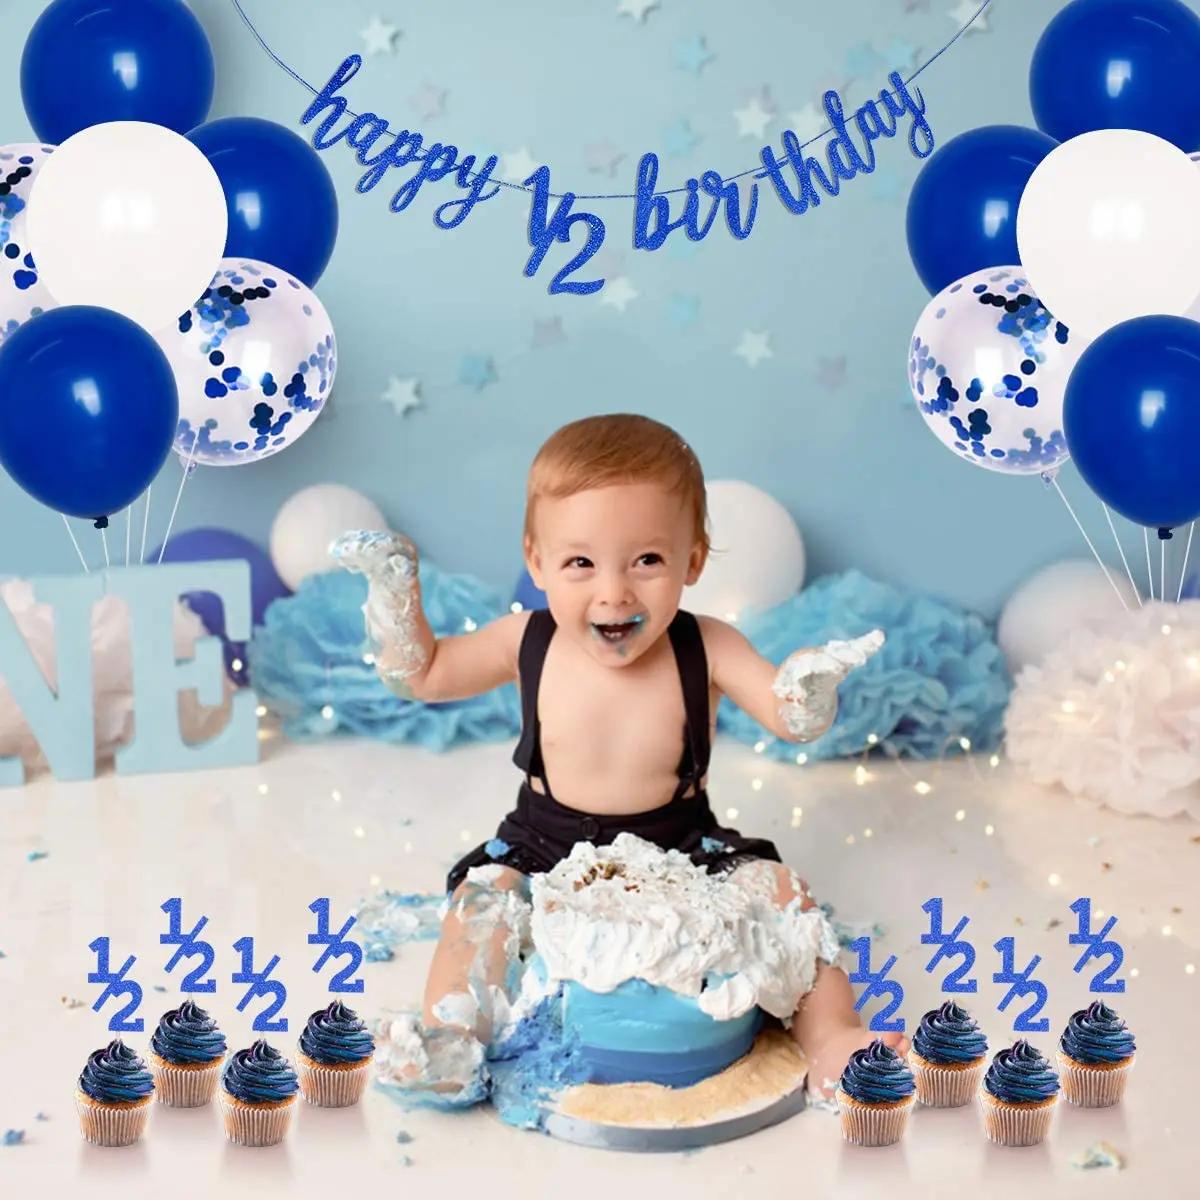 Blue Half Birthday Supplies Balloons Set Happy 1 2 Birthday Banner Cake Topper For Boys 6 Months Birthday Party Decorations Ballons Accessories Aliexpress